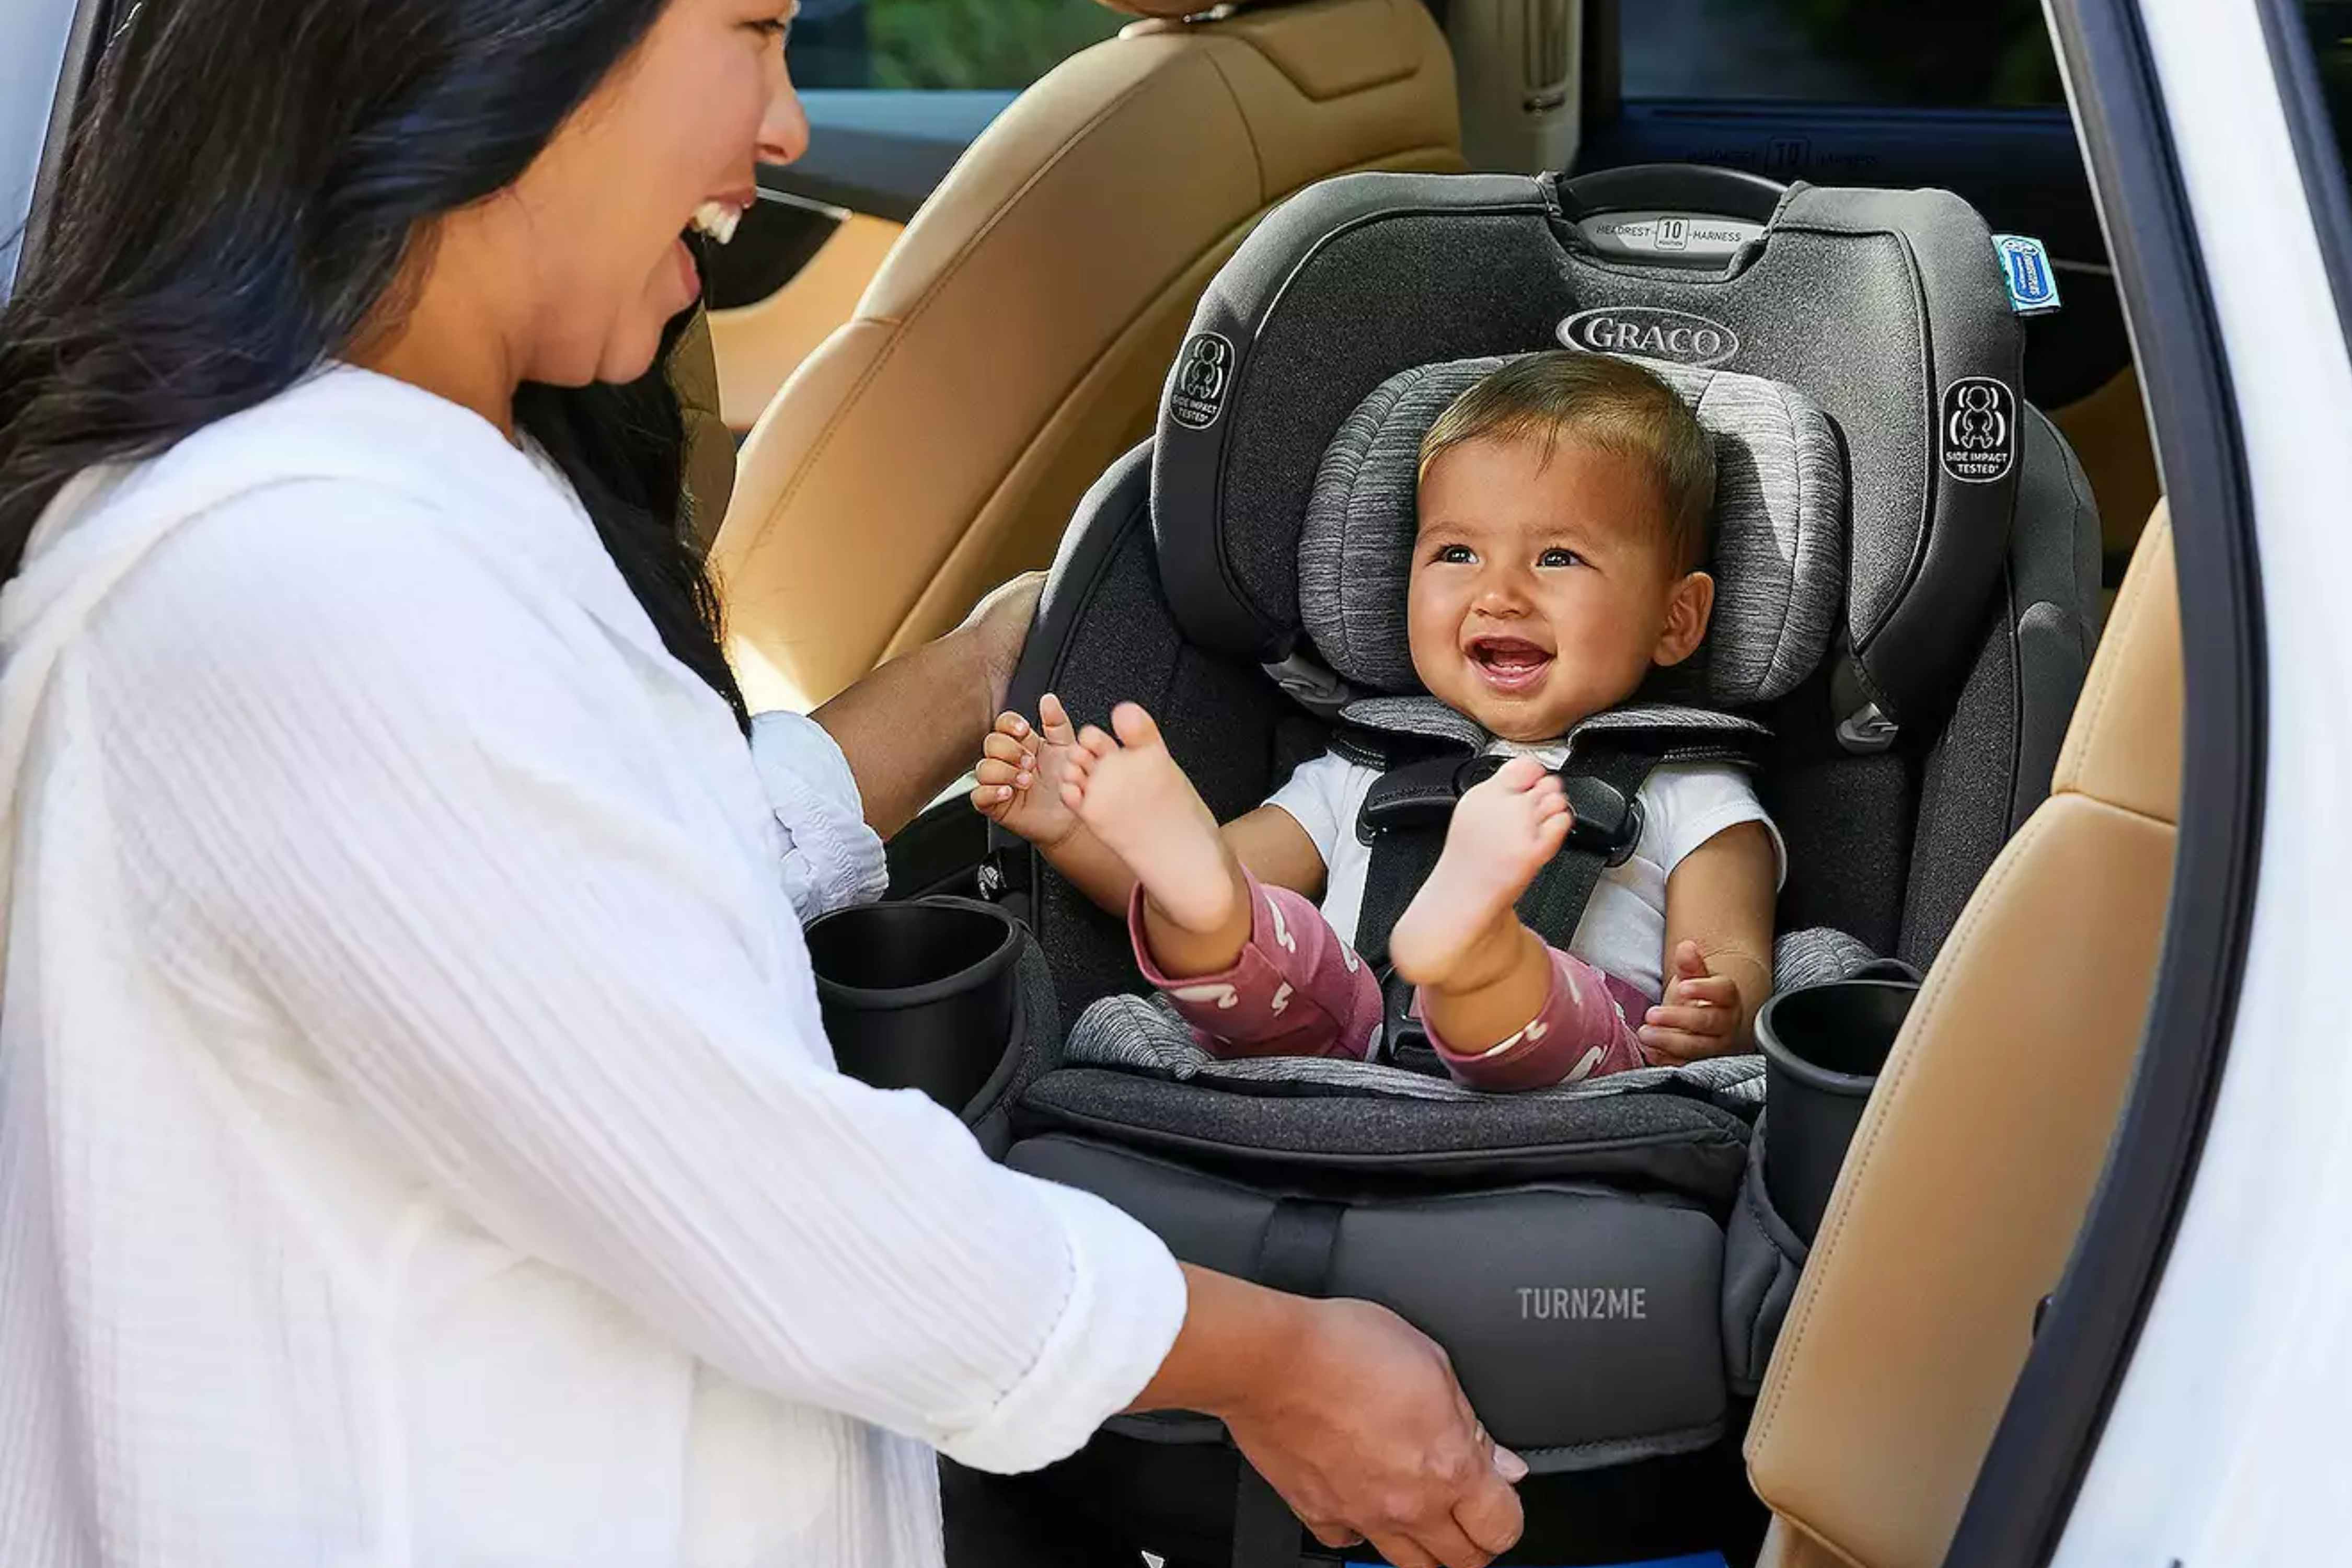 The Graco Turn2Me 3-in-1 Car Seat Is Only $225 After Kohl's Cash